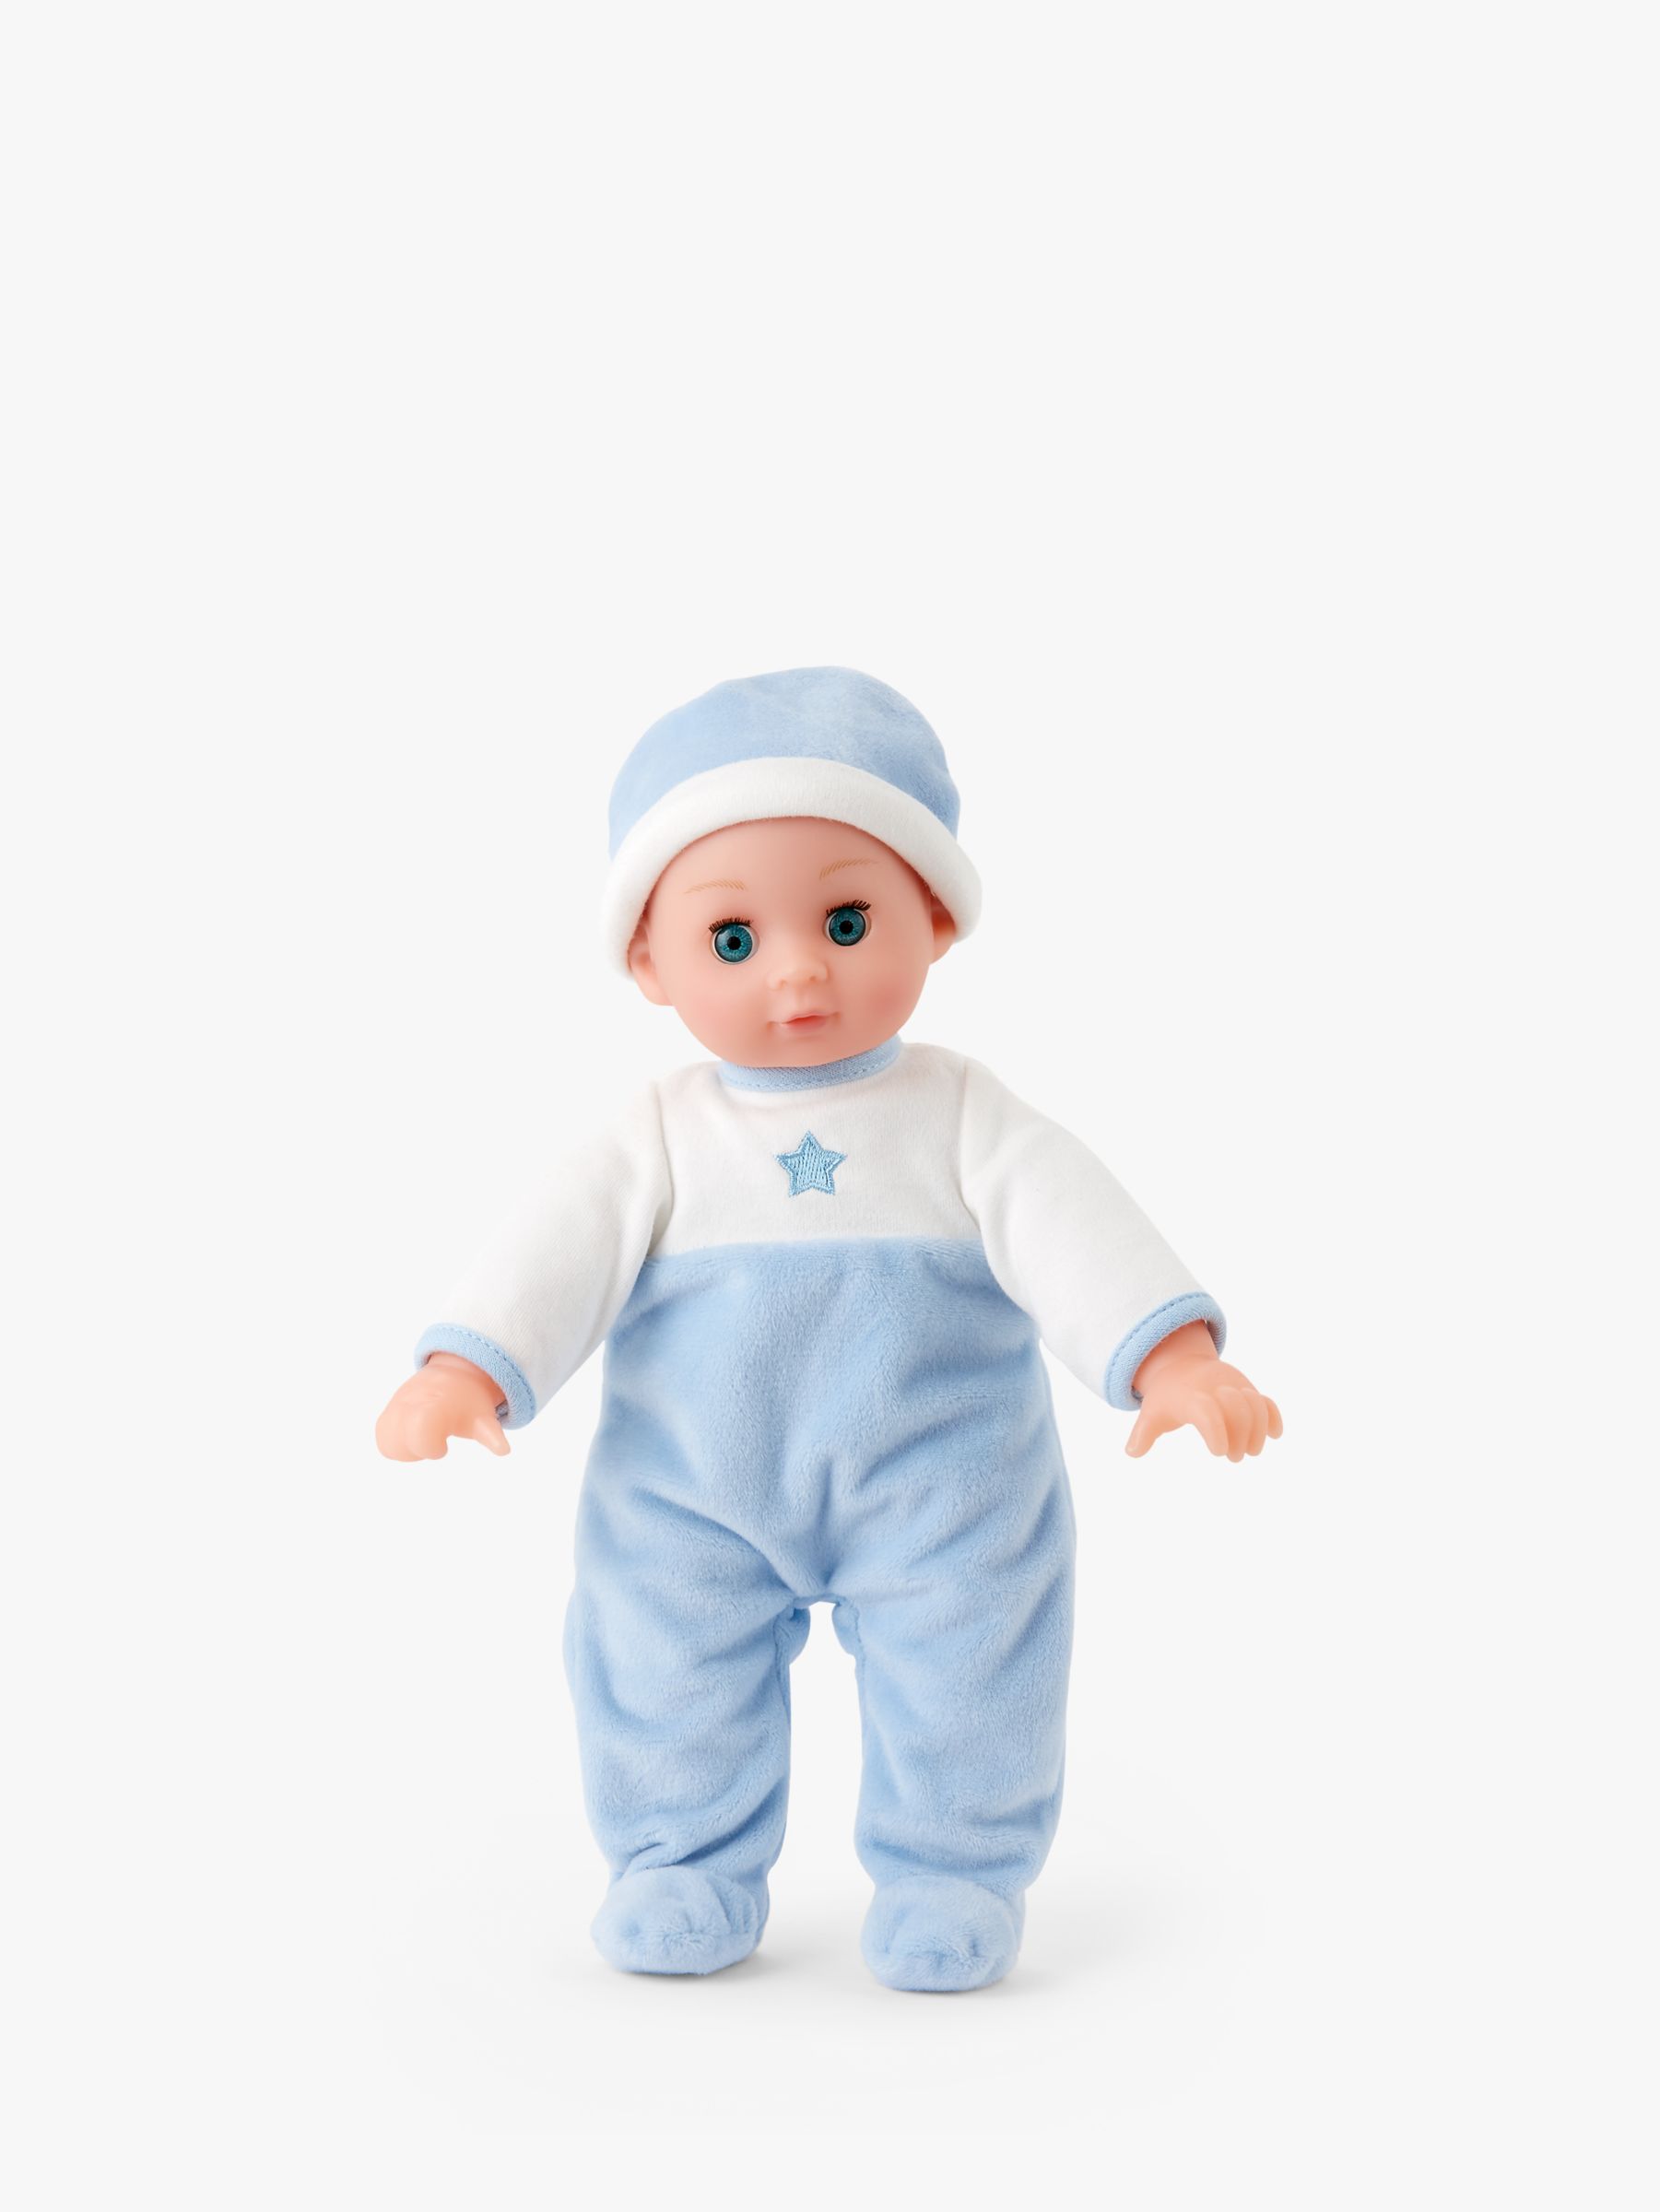 toy baby for boy